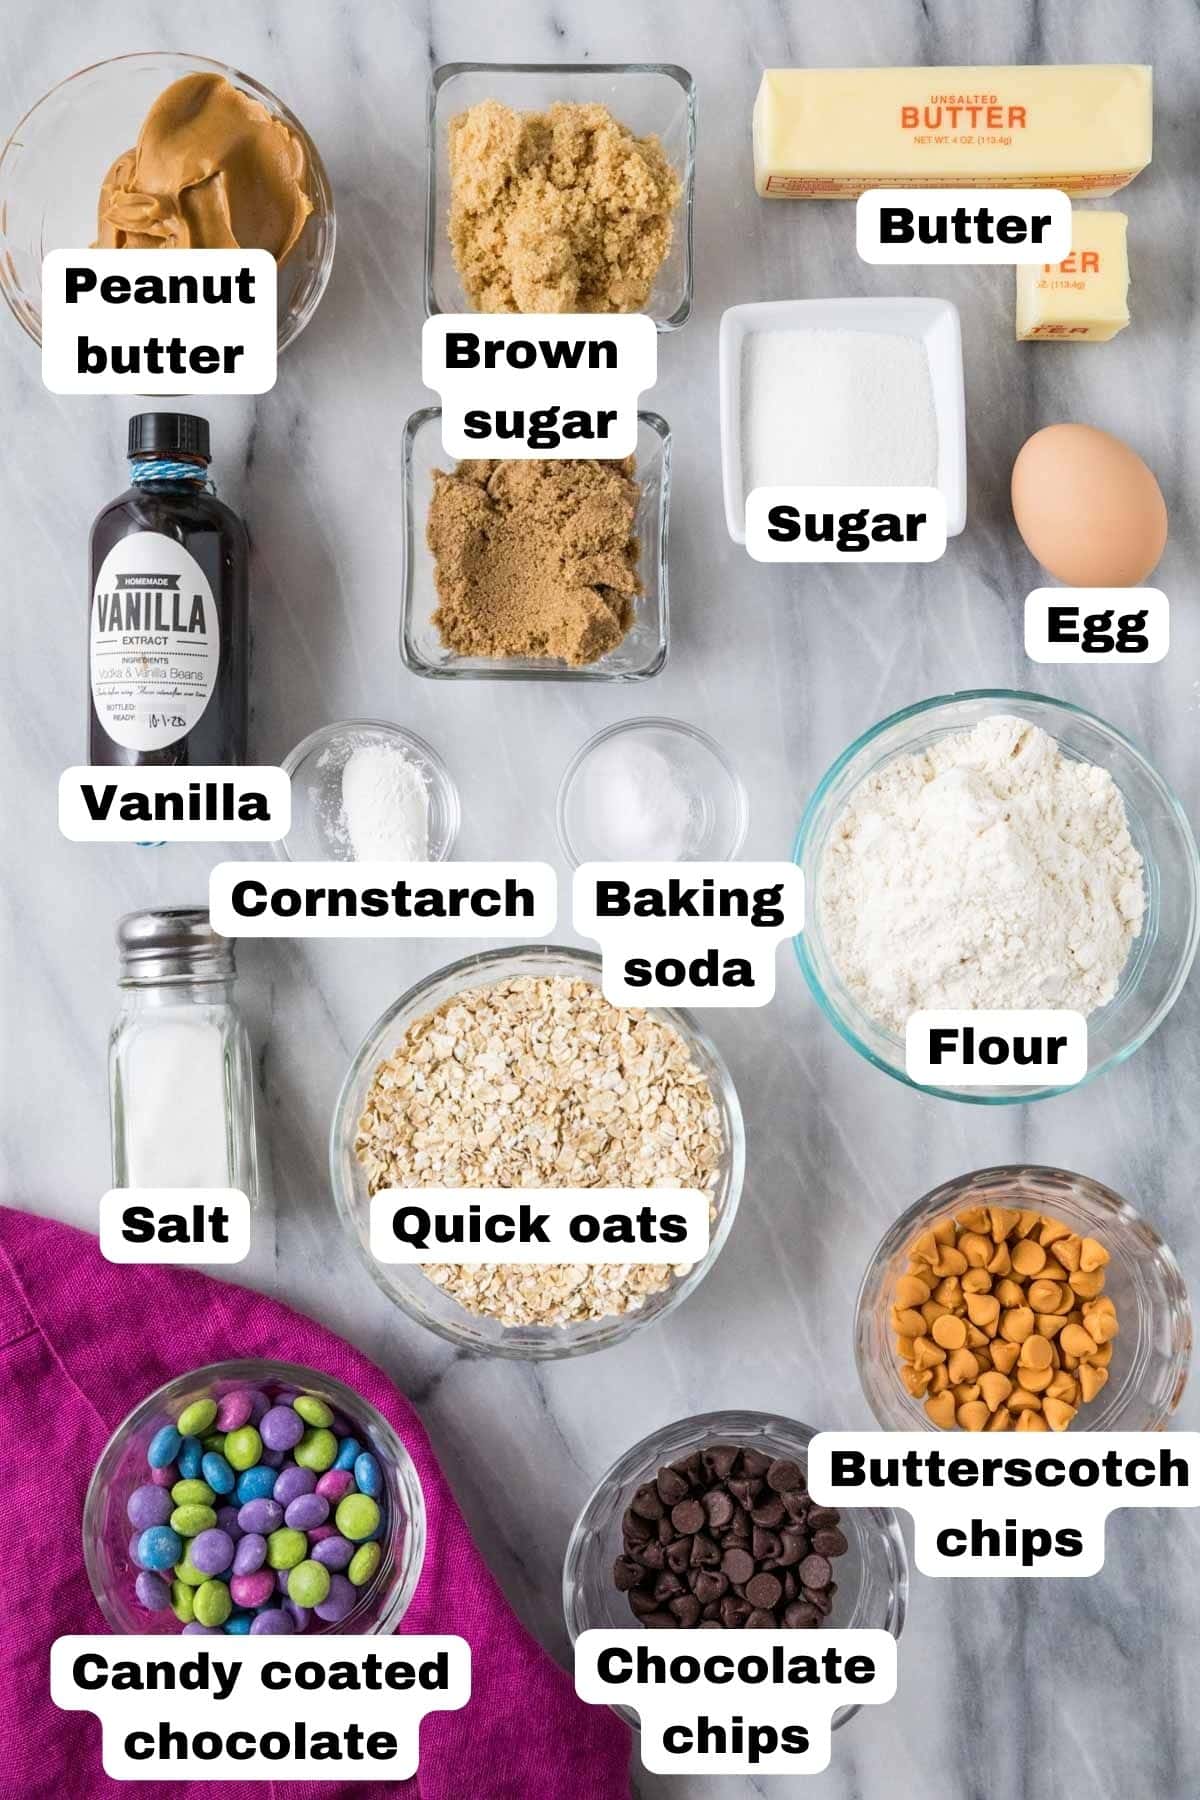 Overhead view of labelled ingredients including brown sugar, oats, peanut butter, and more.